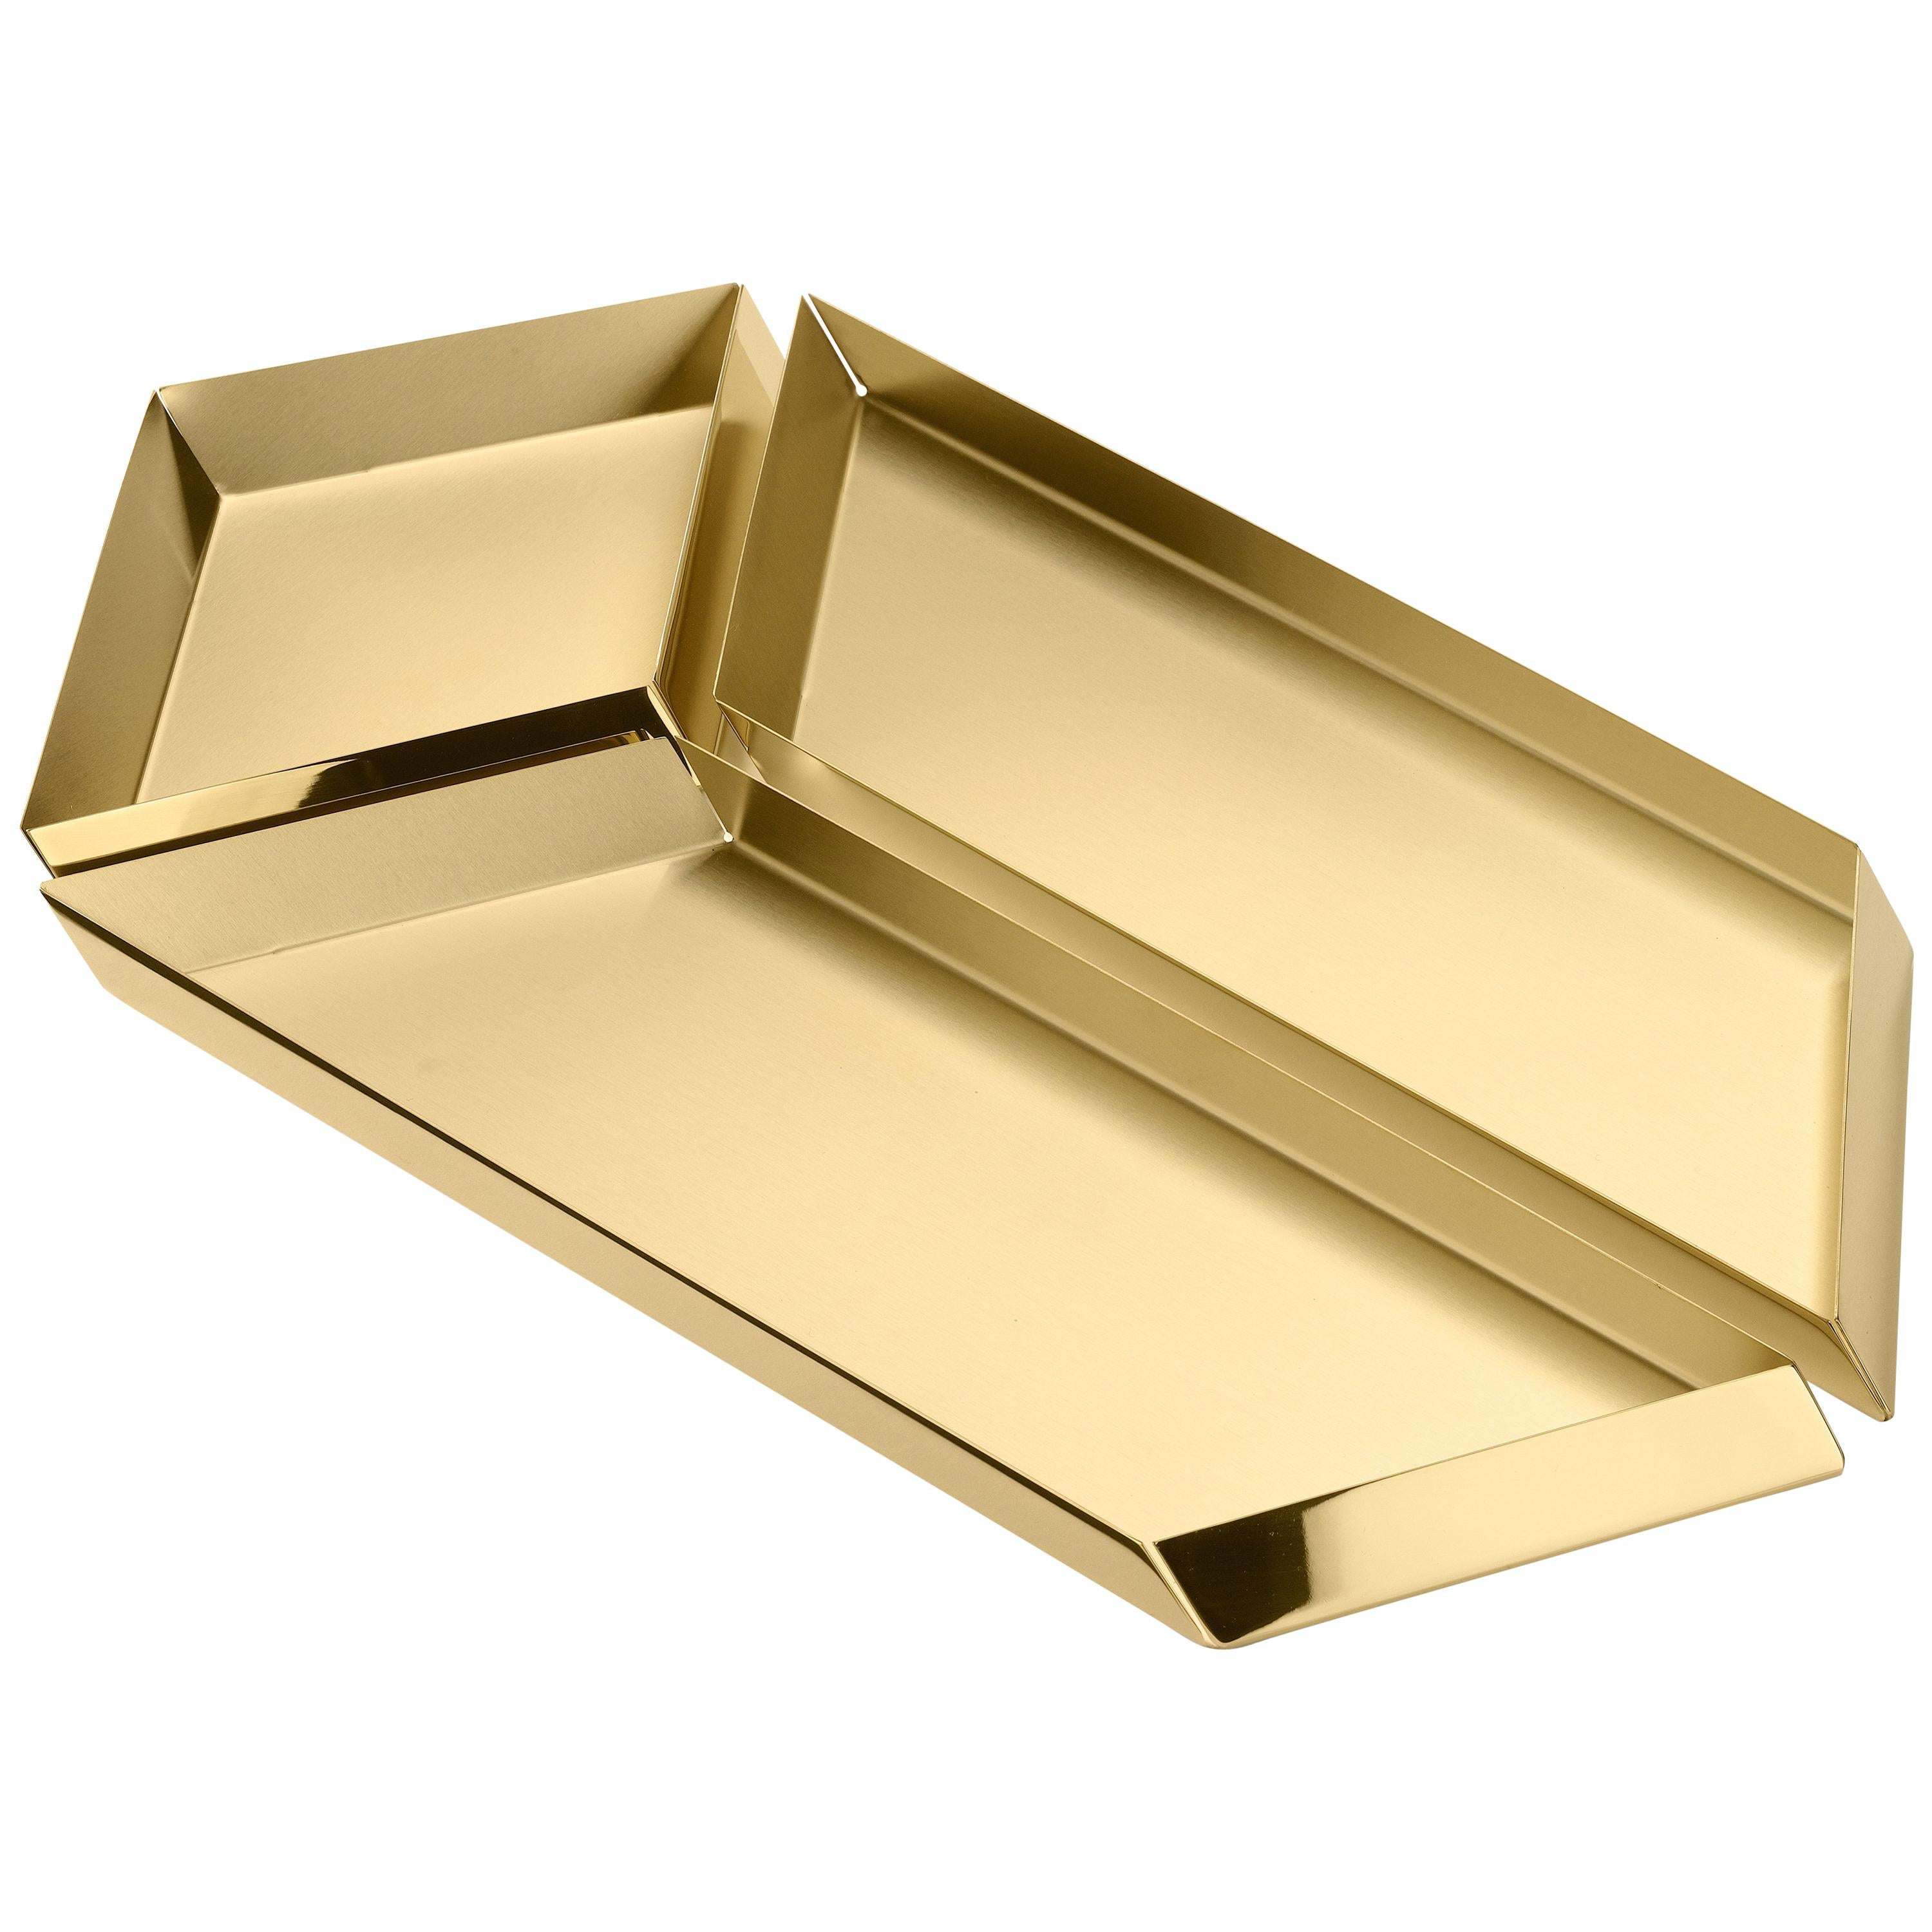 Ghidini 1961 Axonometry Large Parallelepiped Tray in Brass by Elisa Giovanni For Sale